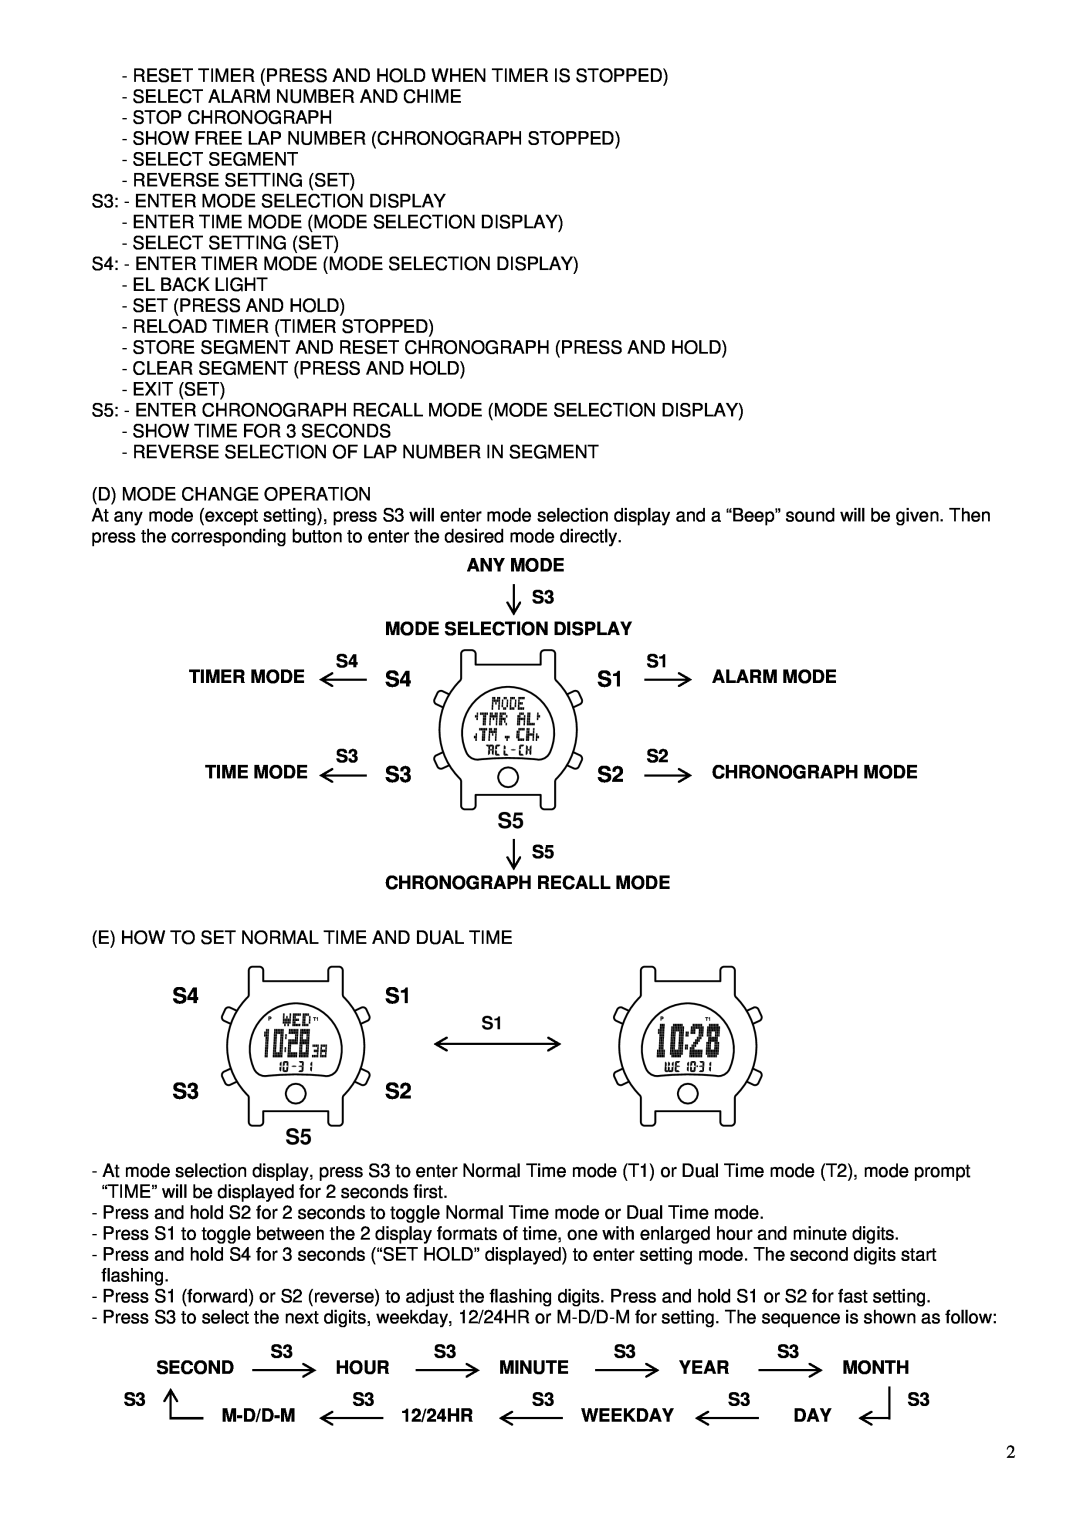 Robic SC-577 operating instructions S4S1, S3S2 S5 